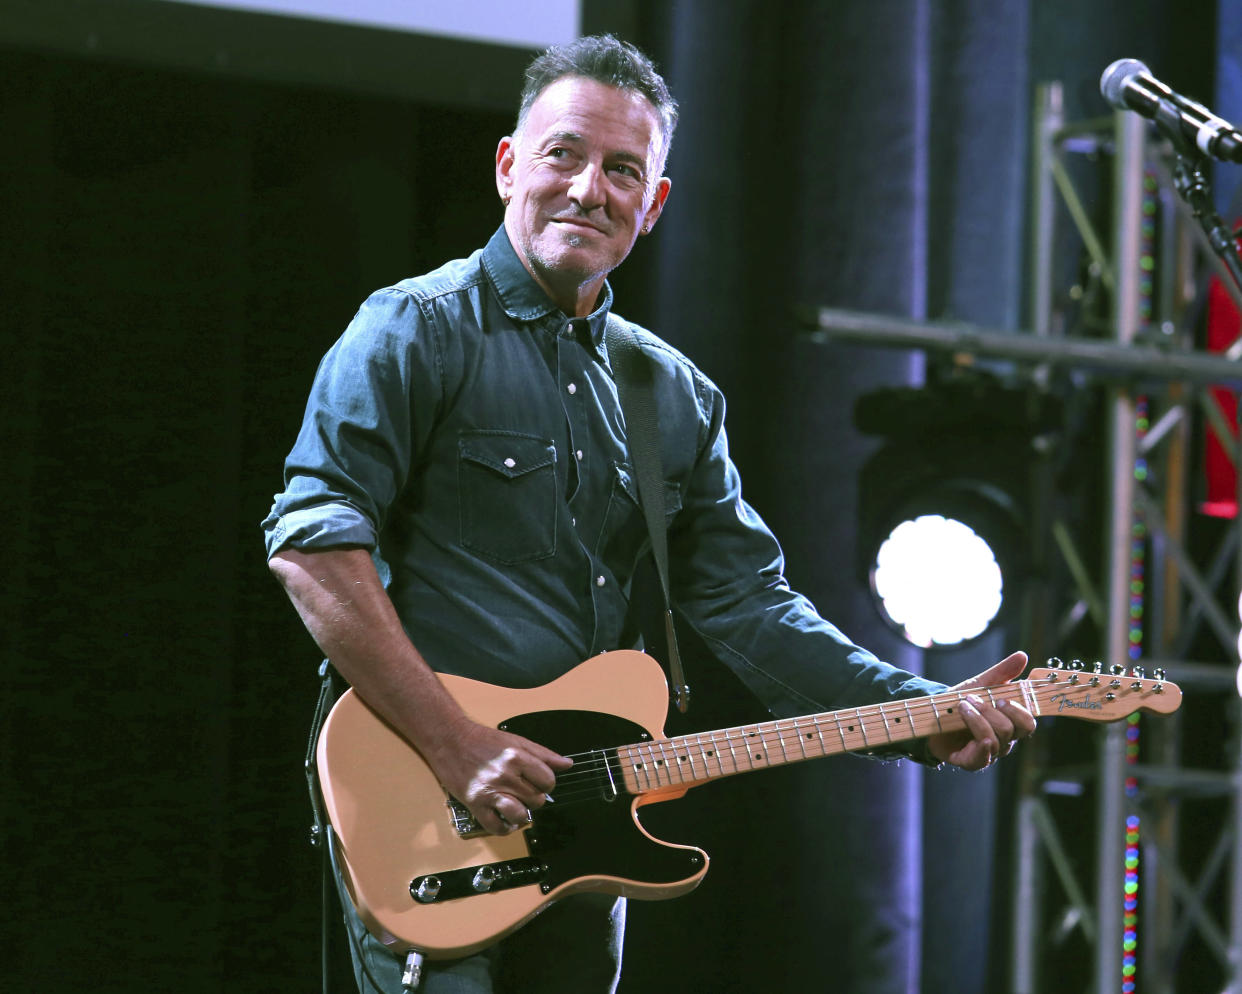 FILE - Bruce Springsteen performs at Stand Up For Heroes in New York on Nov. 1, 2016. Springsteen's new album "Only the Strong Survive" will be released on Nov. 11. (Photo by Greg Allen/Invision/AP, File)